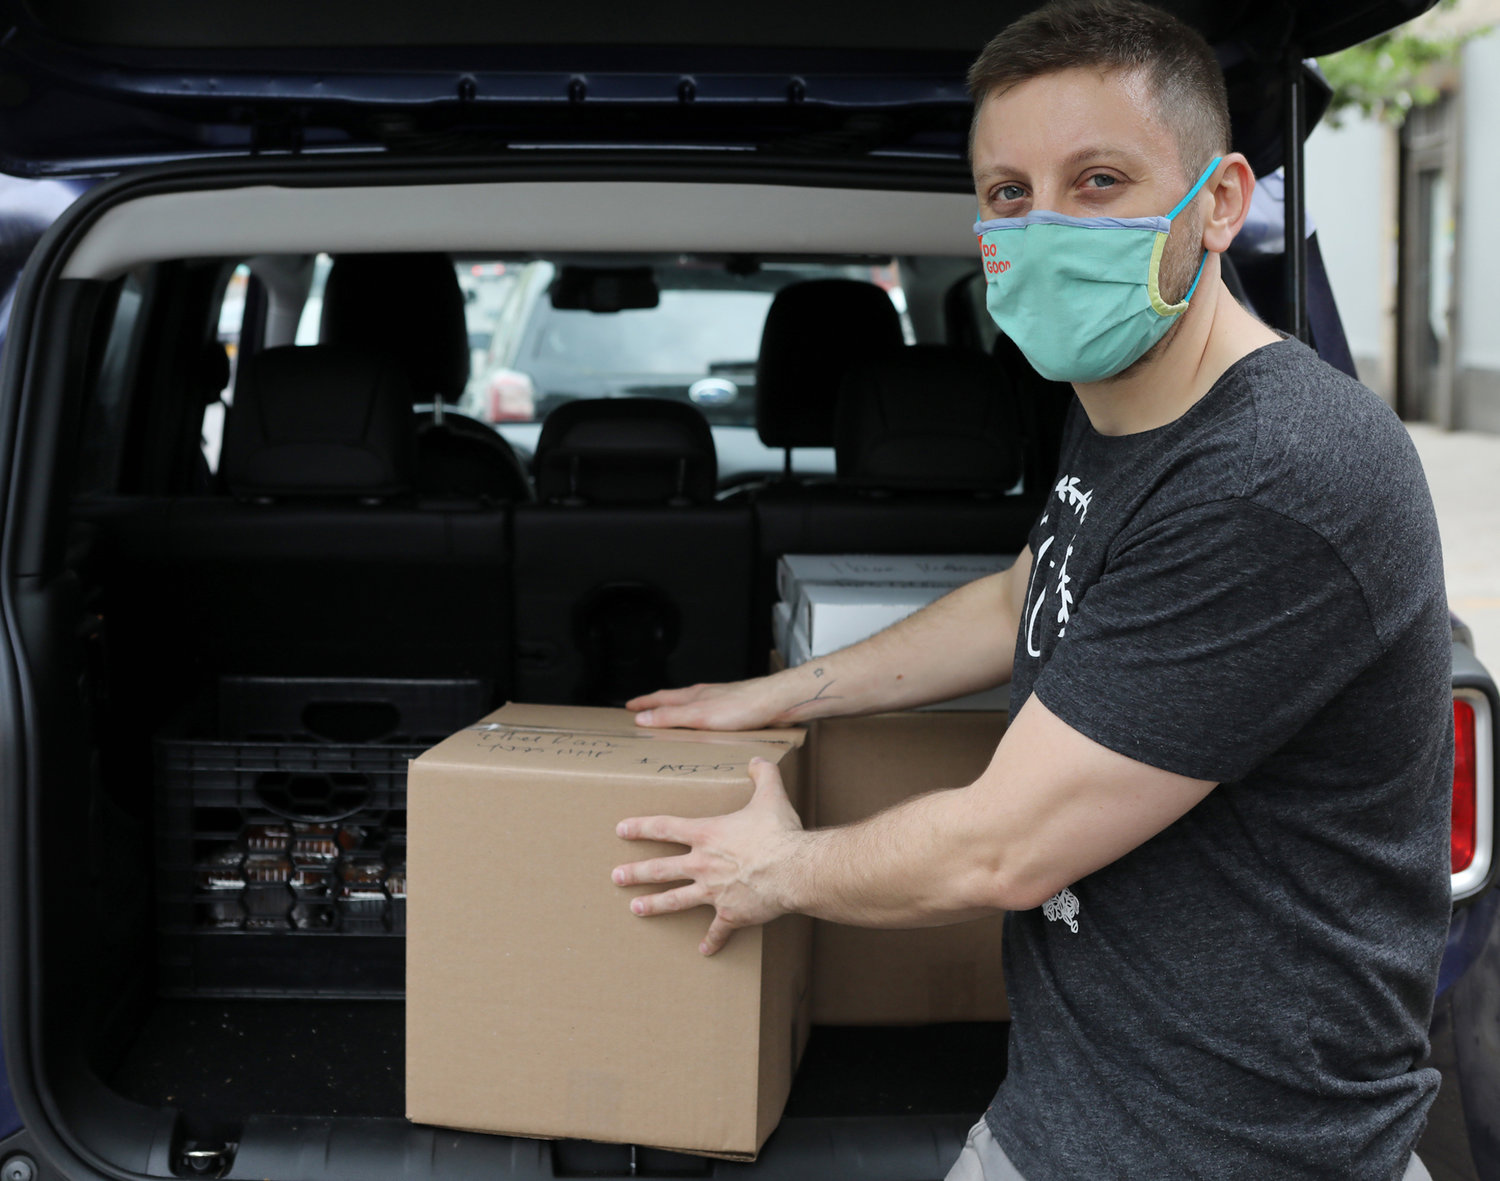 Moss Café’s general manager Ben Alpern packs a vehicle with a box of food that will be delivered to families recently welcoming babies into all areas of the Bronx as part of a partnership between Moss, Ashe Birthing Services and The Birthing Place.